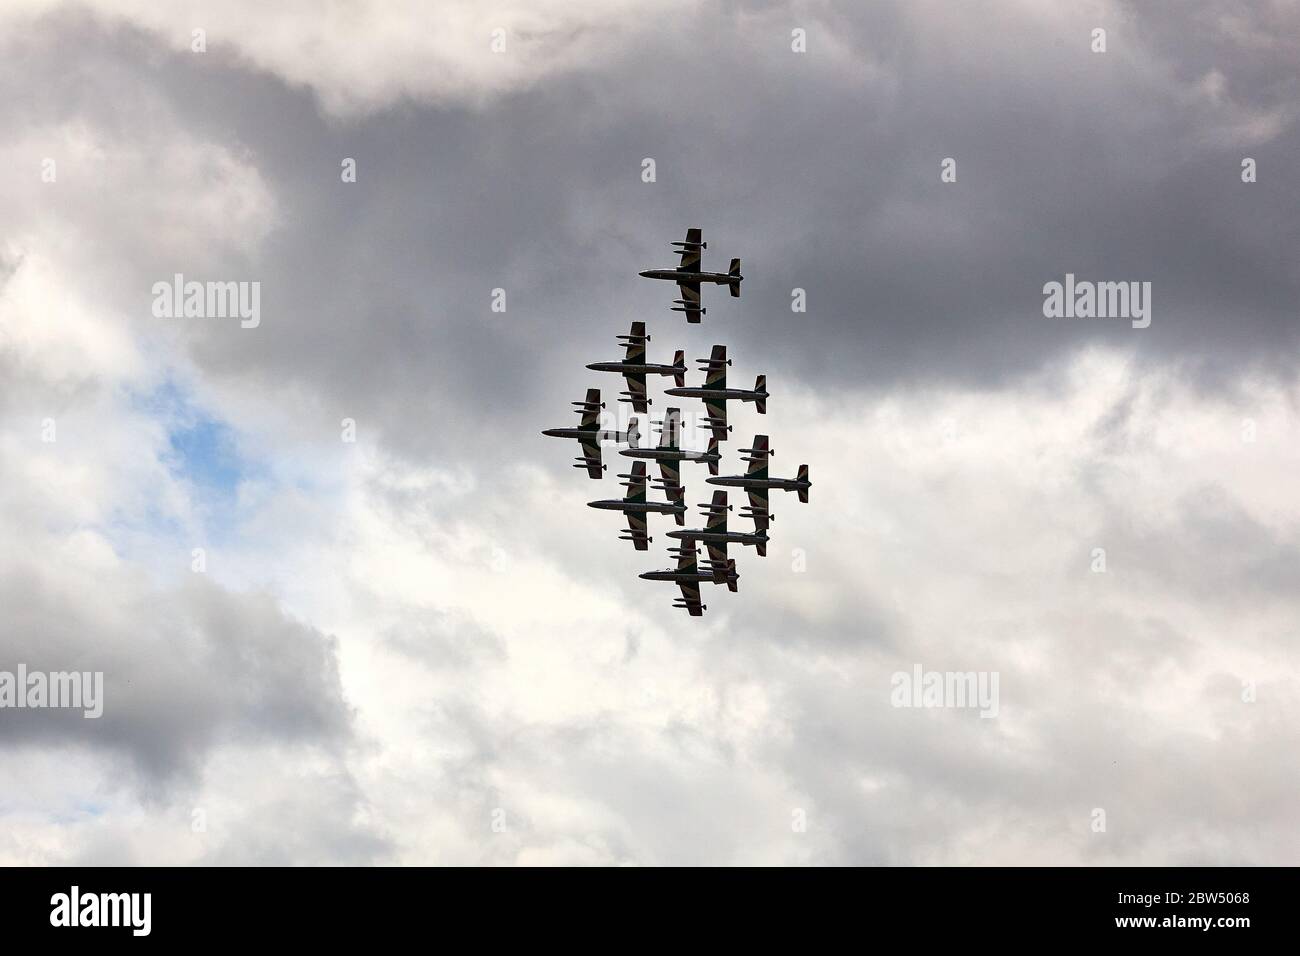 Bologna, Italy. 29th May, 2020. Italy's aerobatic team Frecce Tricolori (Tricolour arrows) fly over Bologna as part of celebrations for the 74th anniversary of the proclamation of the Italian Republic on May 29, 2020 in Bologna, Italy. Credit: Massimiliano Donati/Alamy Live News Stock Photo